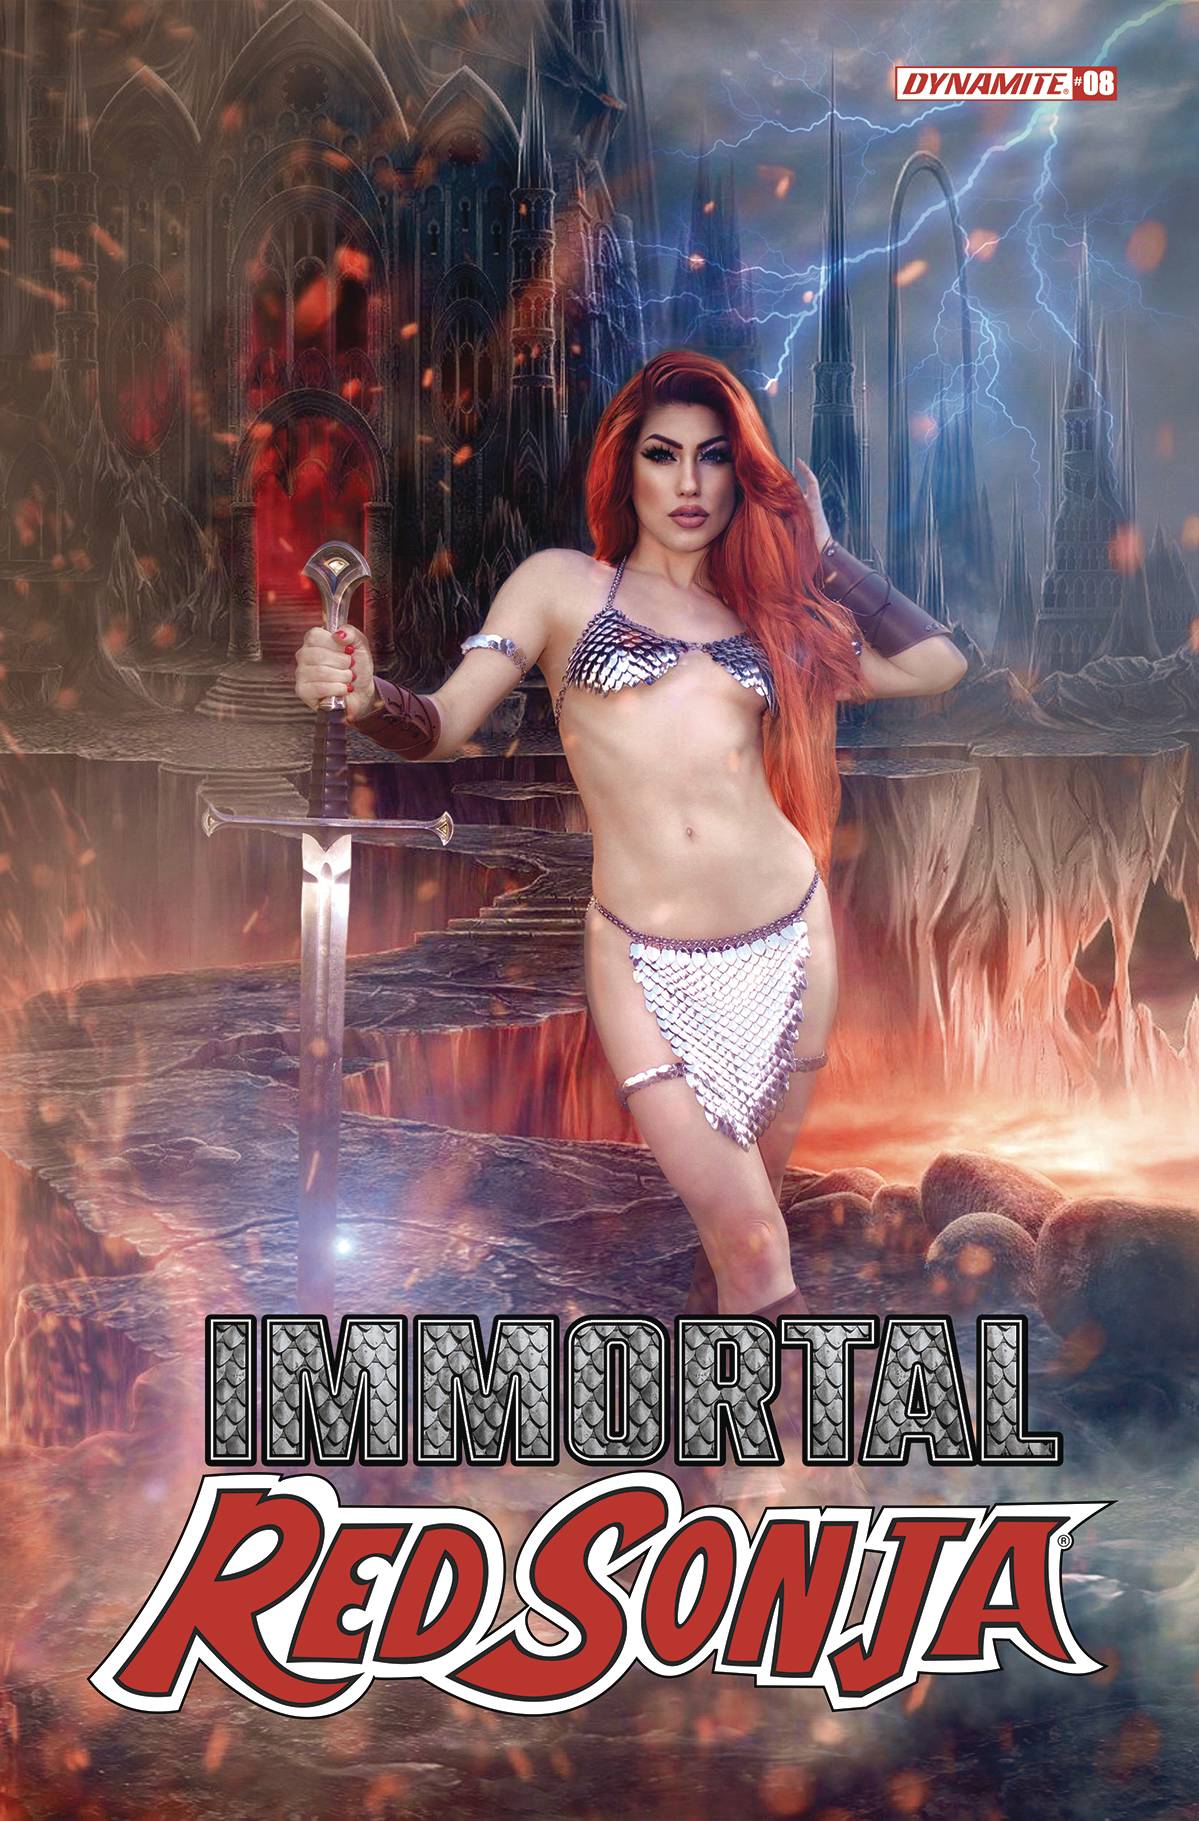 The One Stop Shop Comics & Games Immortal Red Sonja #8 Cvr E Cosplay (11/16/2022) DYNAMITE